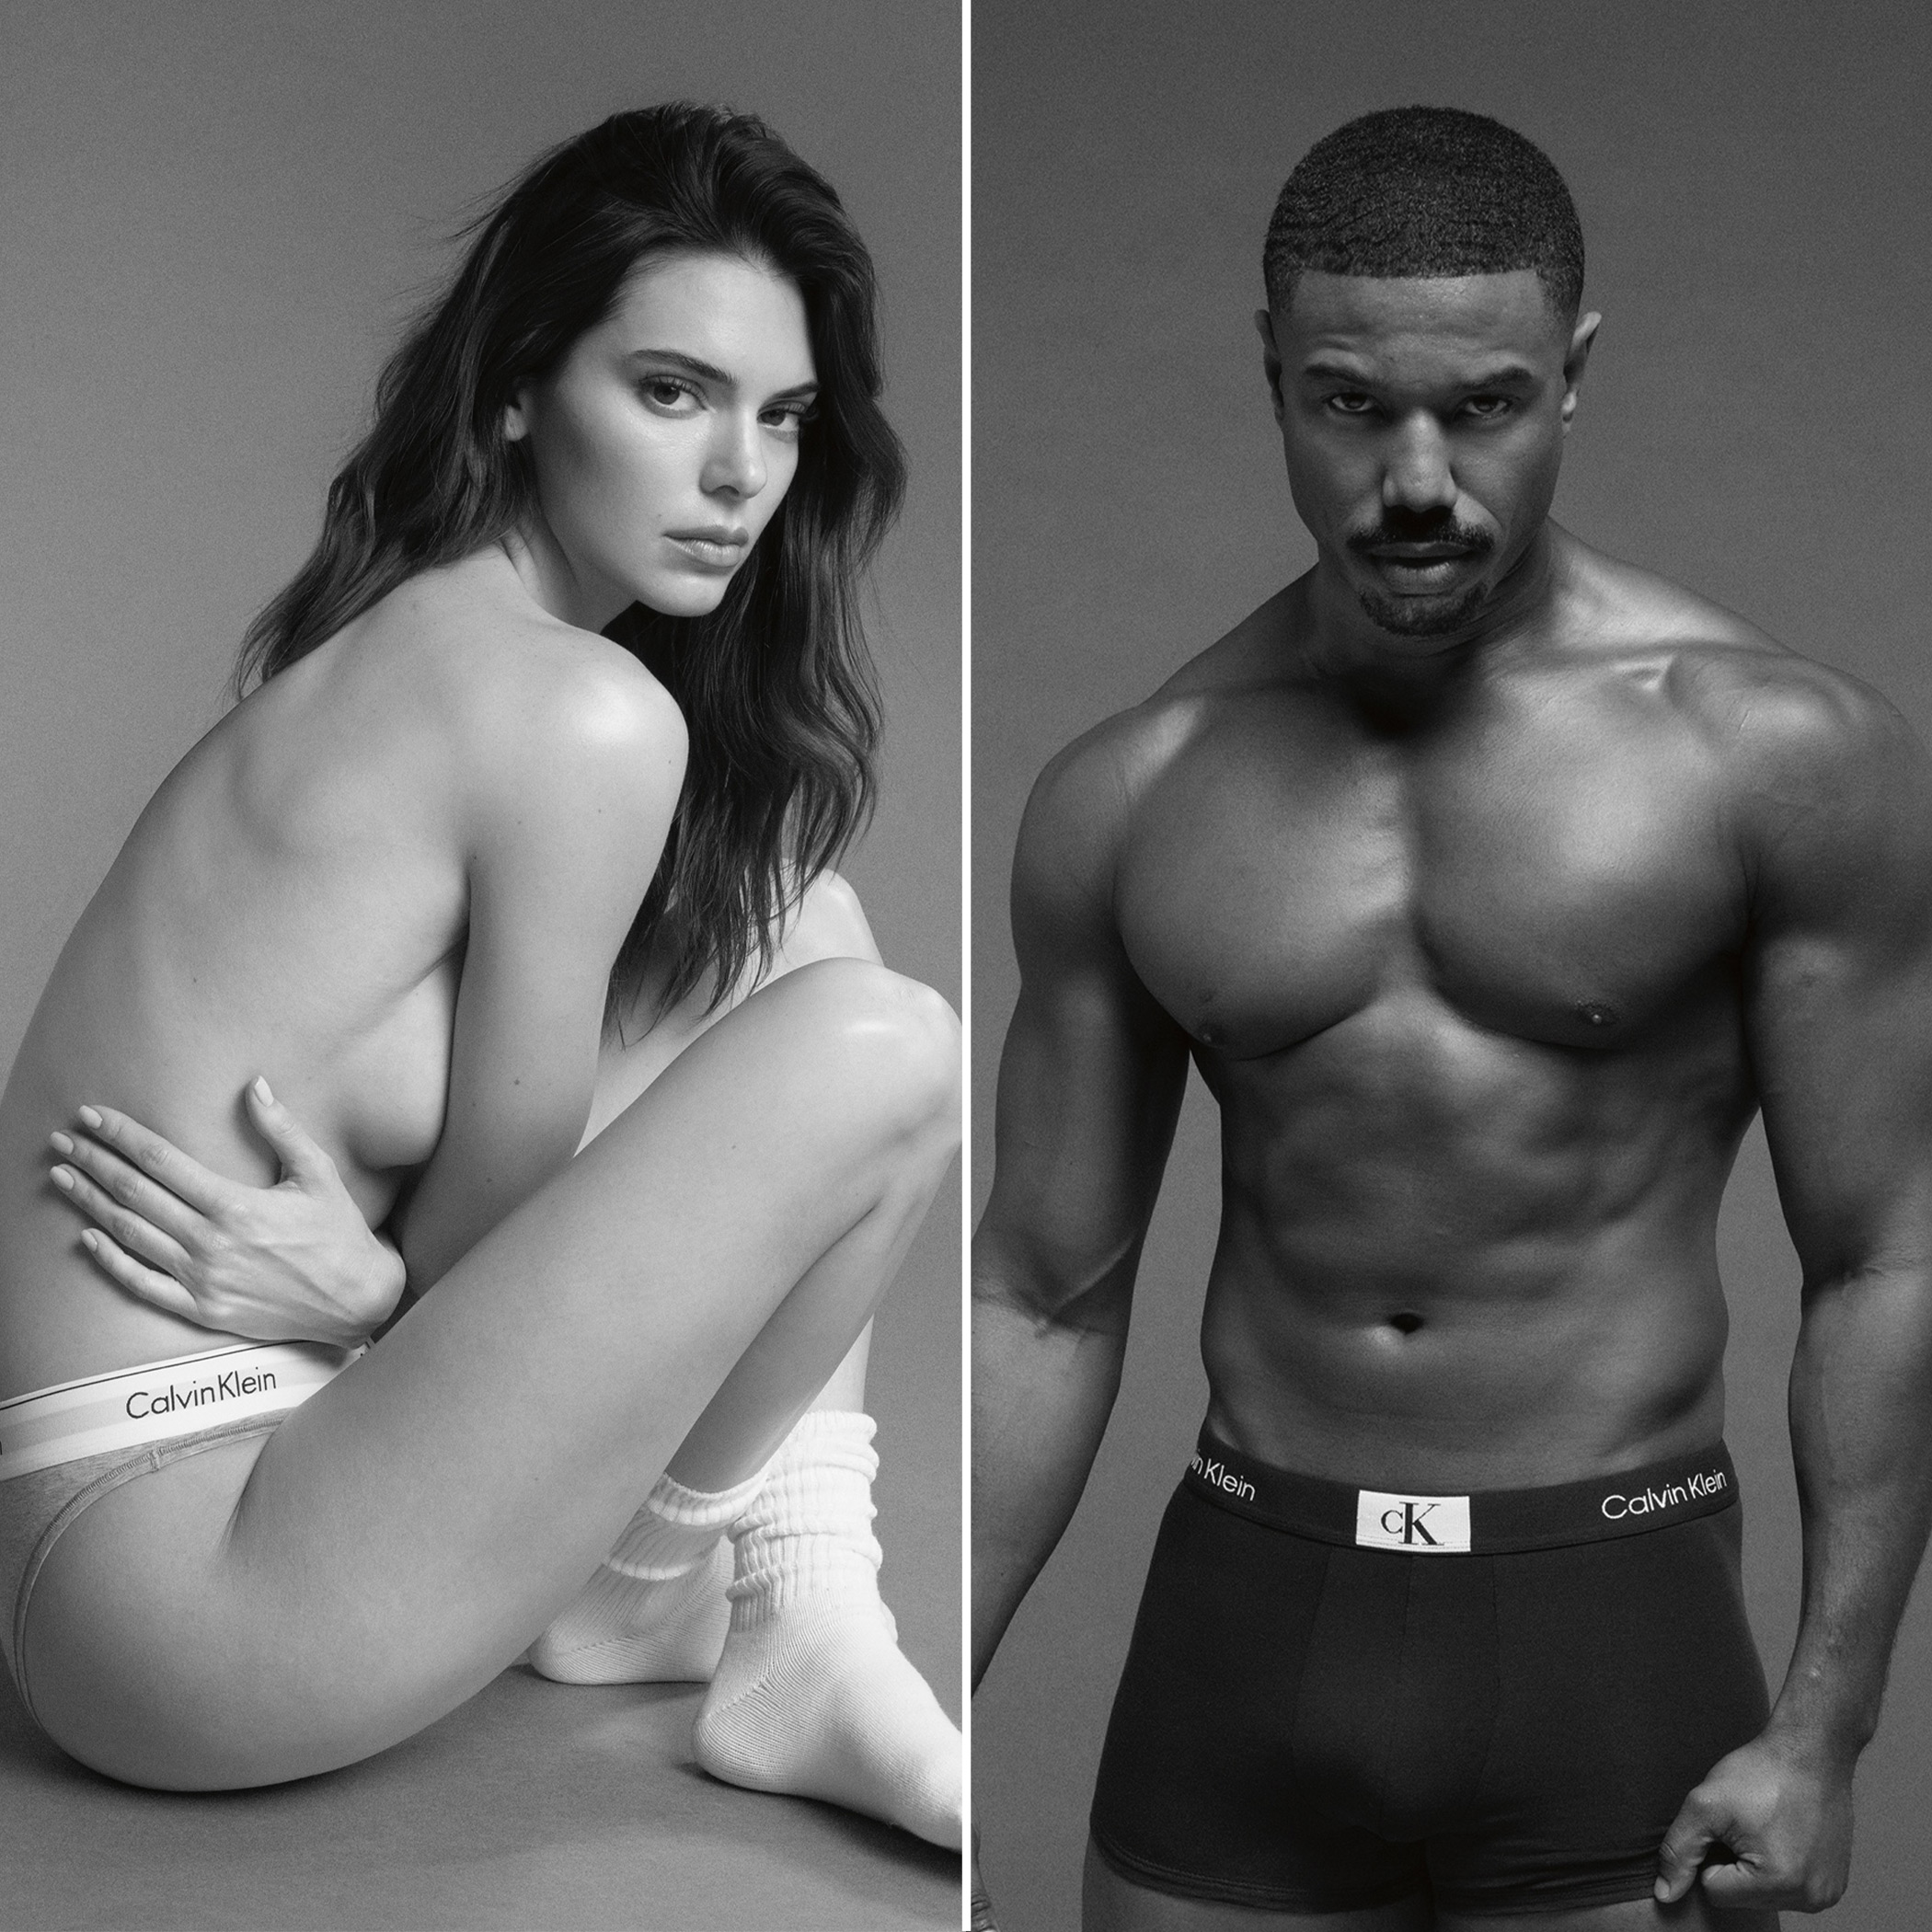 Calvin Klein: I Would Never Have Cast Kendall Jenner in a Campaign